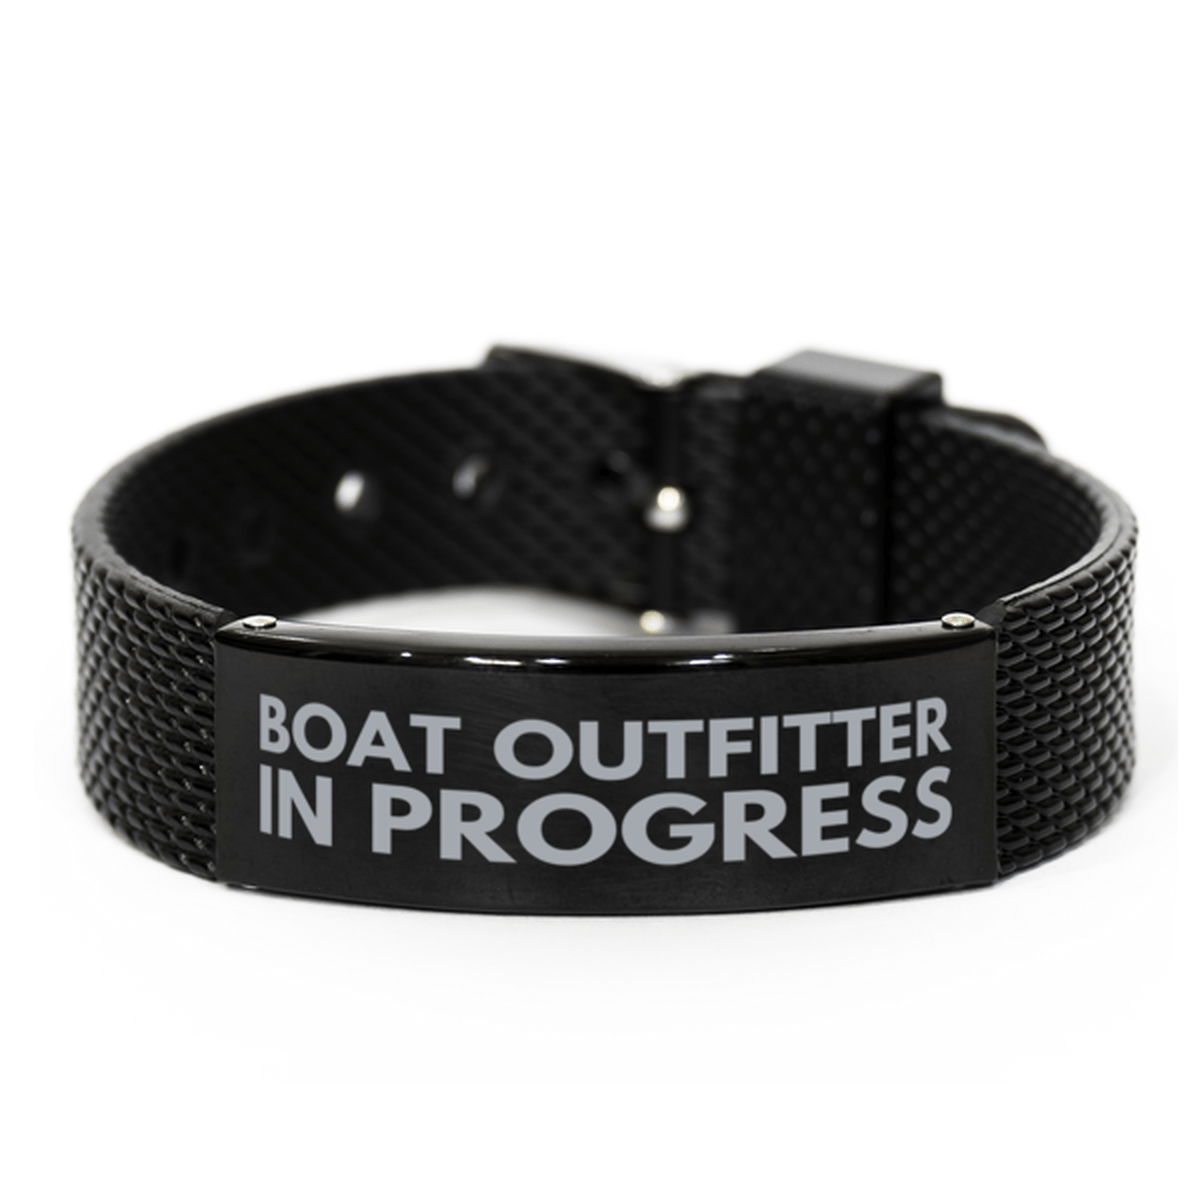 Inspirational Boat Outfitter Black Shark Mesh Bracelet, Boat Outfitter In Progress, Best Graduation Gifts for Students